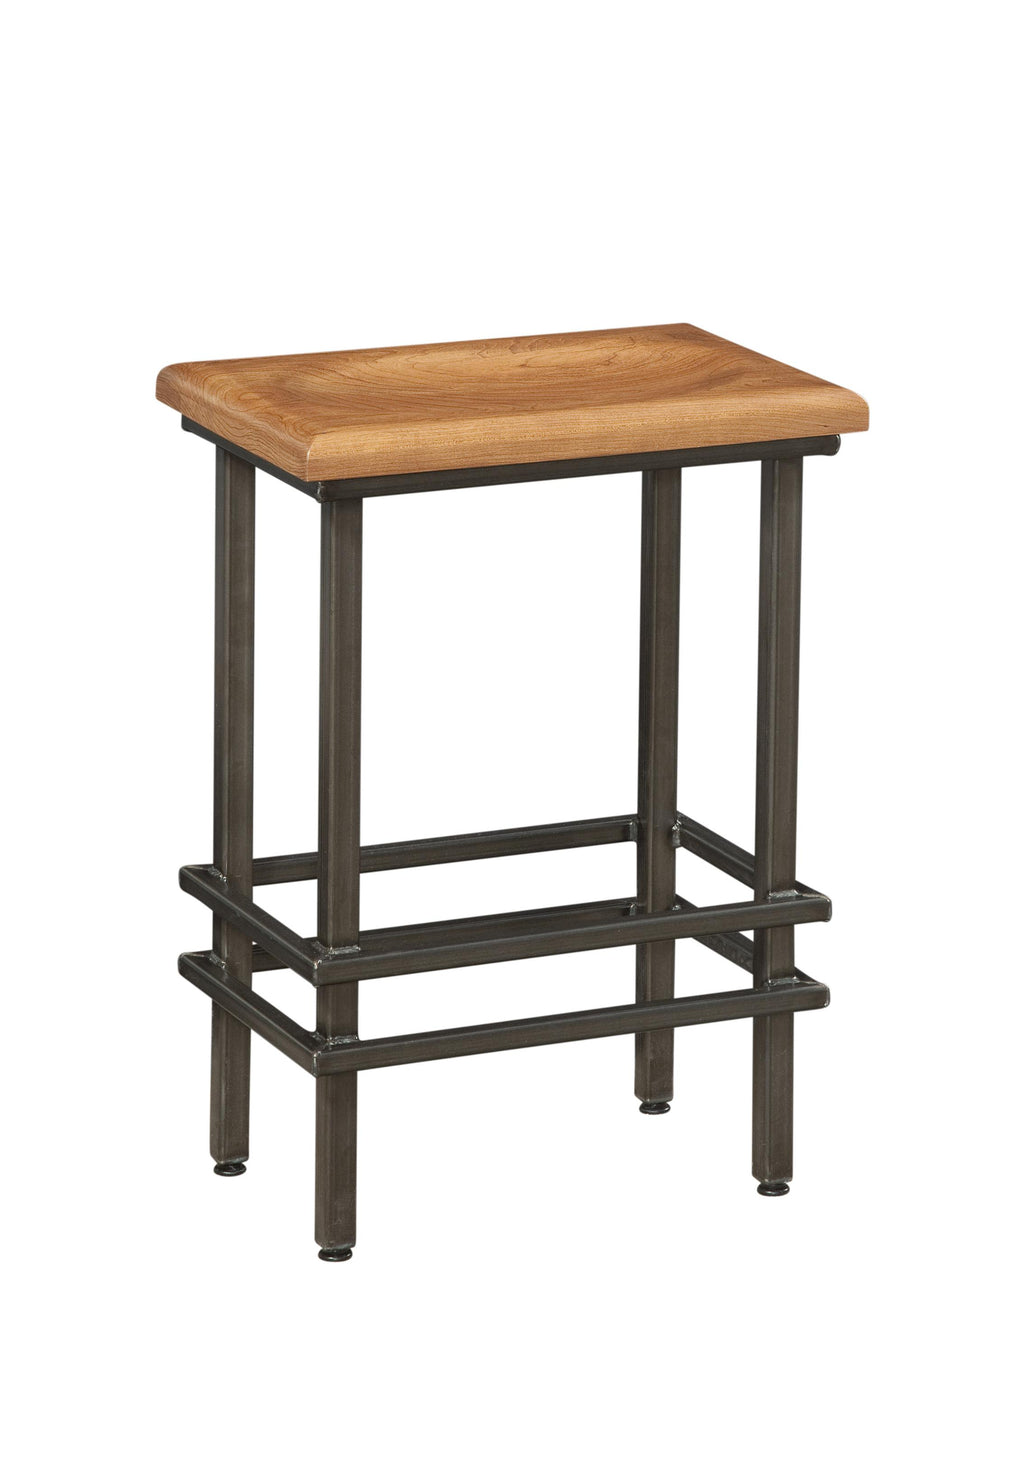 24" Deco Natural Cherry And Black Steel Bar Stool